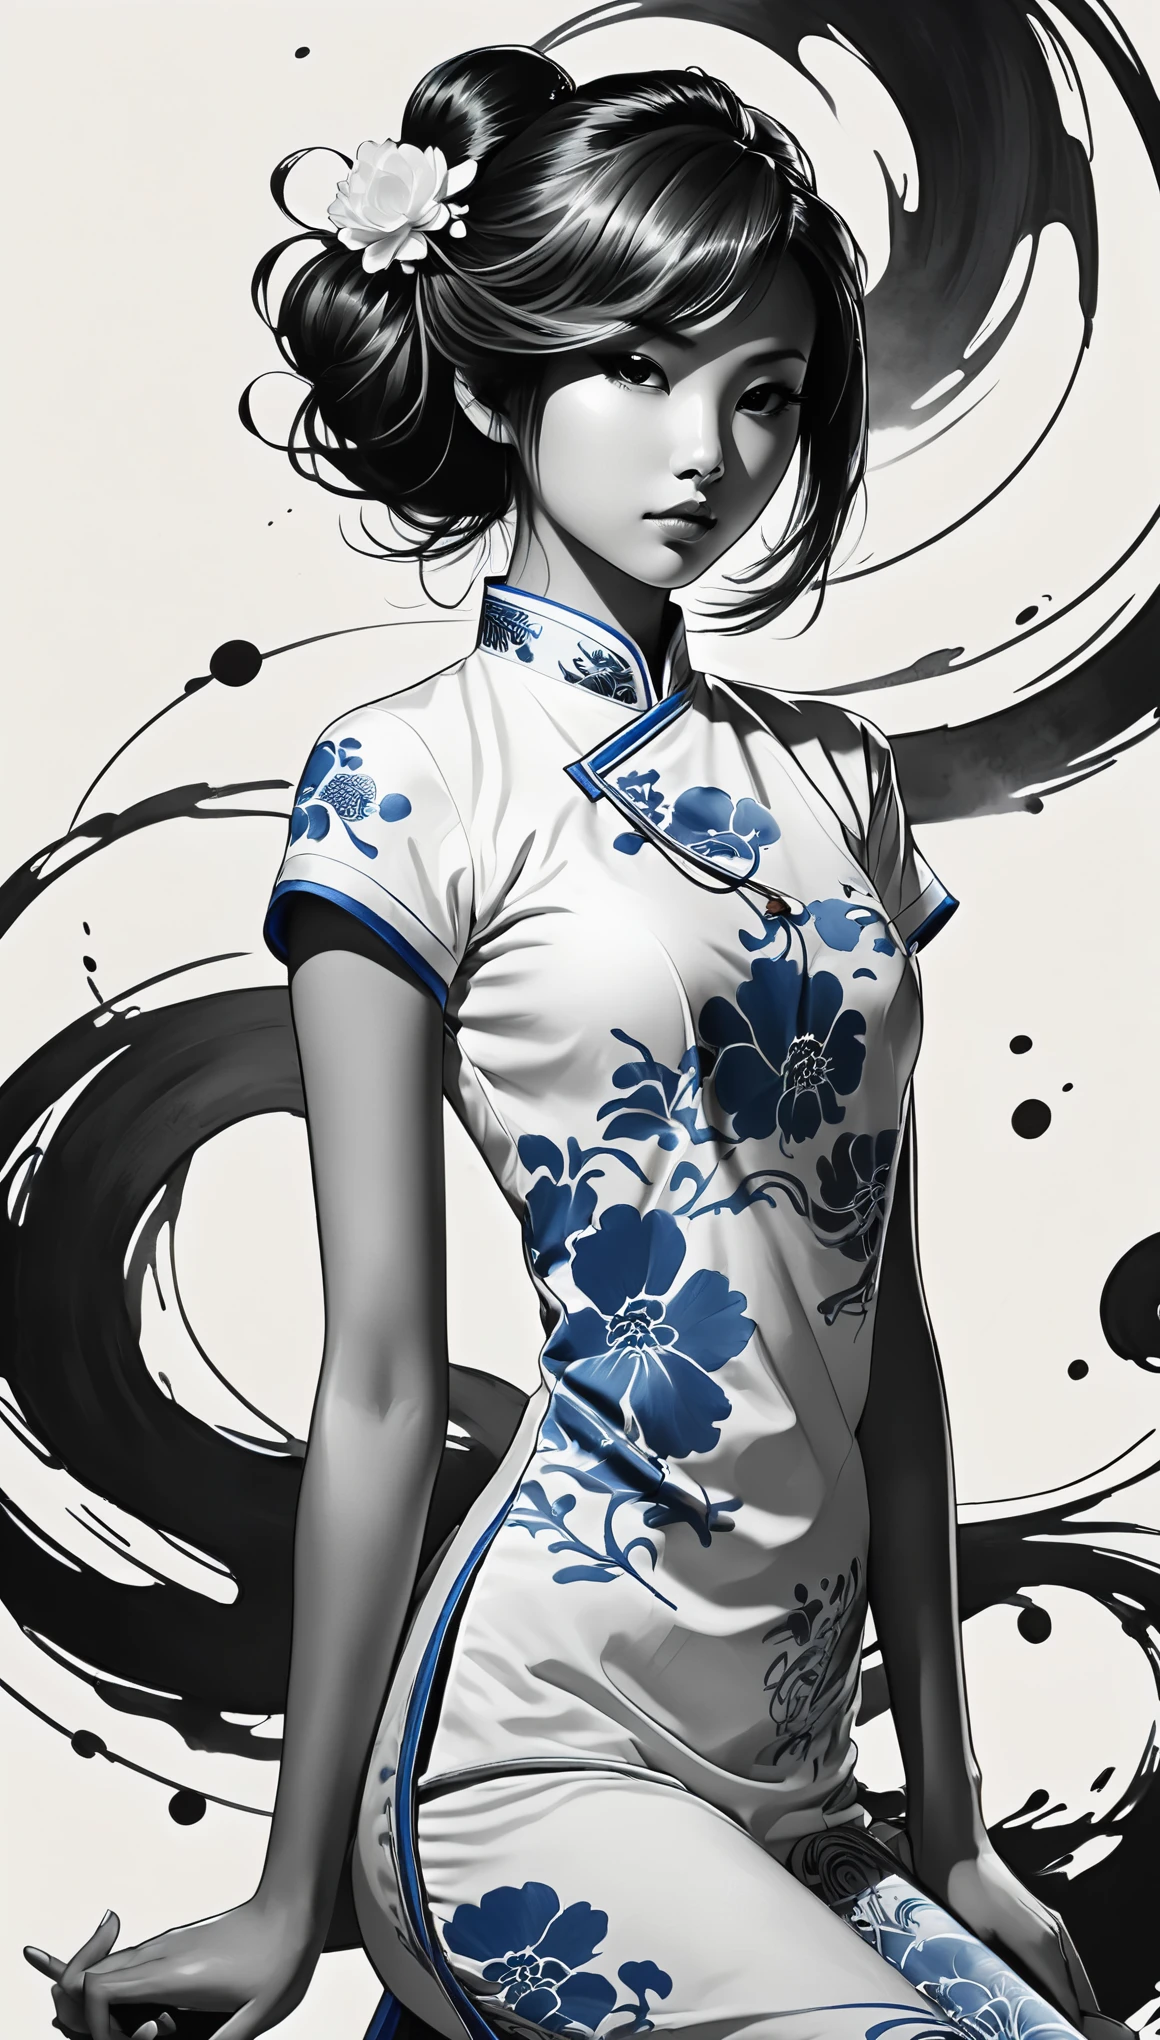 (Pencil_Sketch:1.2, messy lines, greyscale, traditional media, sketch),a girl, streaked hair, streaked hair, Blue and white porcelain cheongsam, Black and white yin yang tai chi background, gangster girl, backlight, Deep shadows, cat silhouette light, Cat squats on girl‘s shoulder, Charming suit cheongsam design, minimalist style, Tai Chi, Yin Yang style, Ink splash style background., chiaroscuro, glowing light, backlighting, motion lines, Carl Larsson, UHD, anatomically correct, masterpiece, retina, UHD, masterpiece